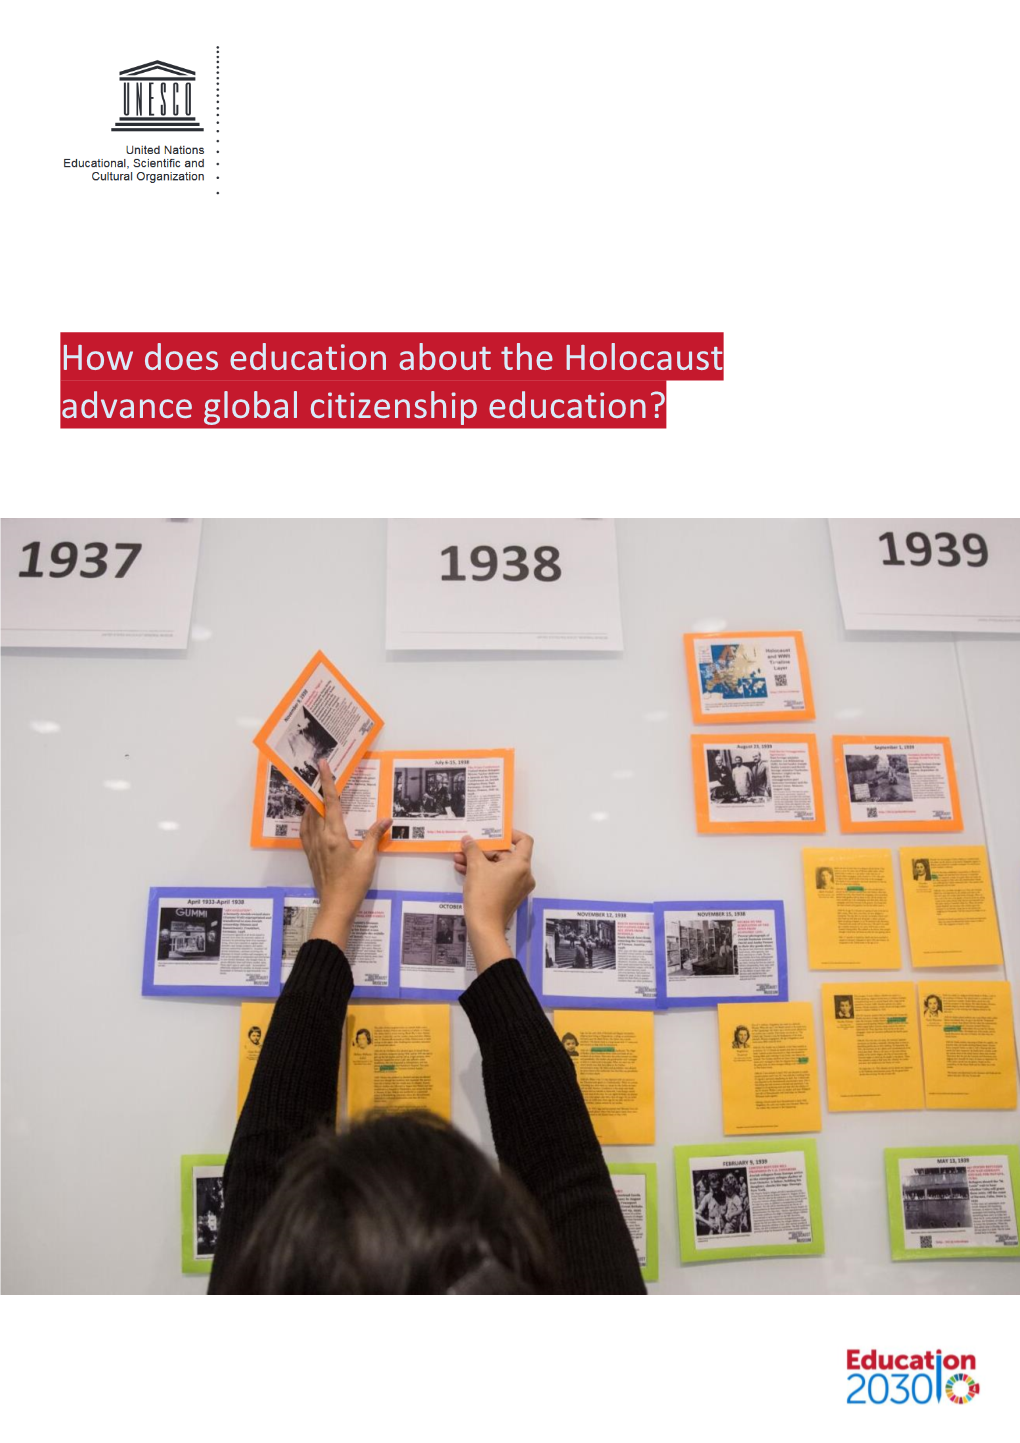 How Does Education About the Holocaust Advance Global Citizenship Education?